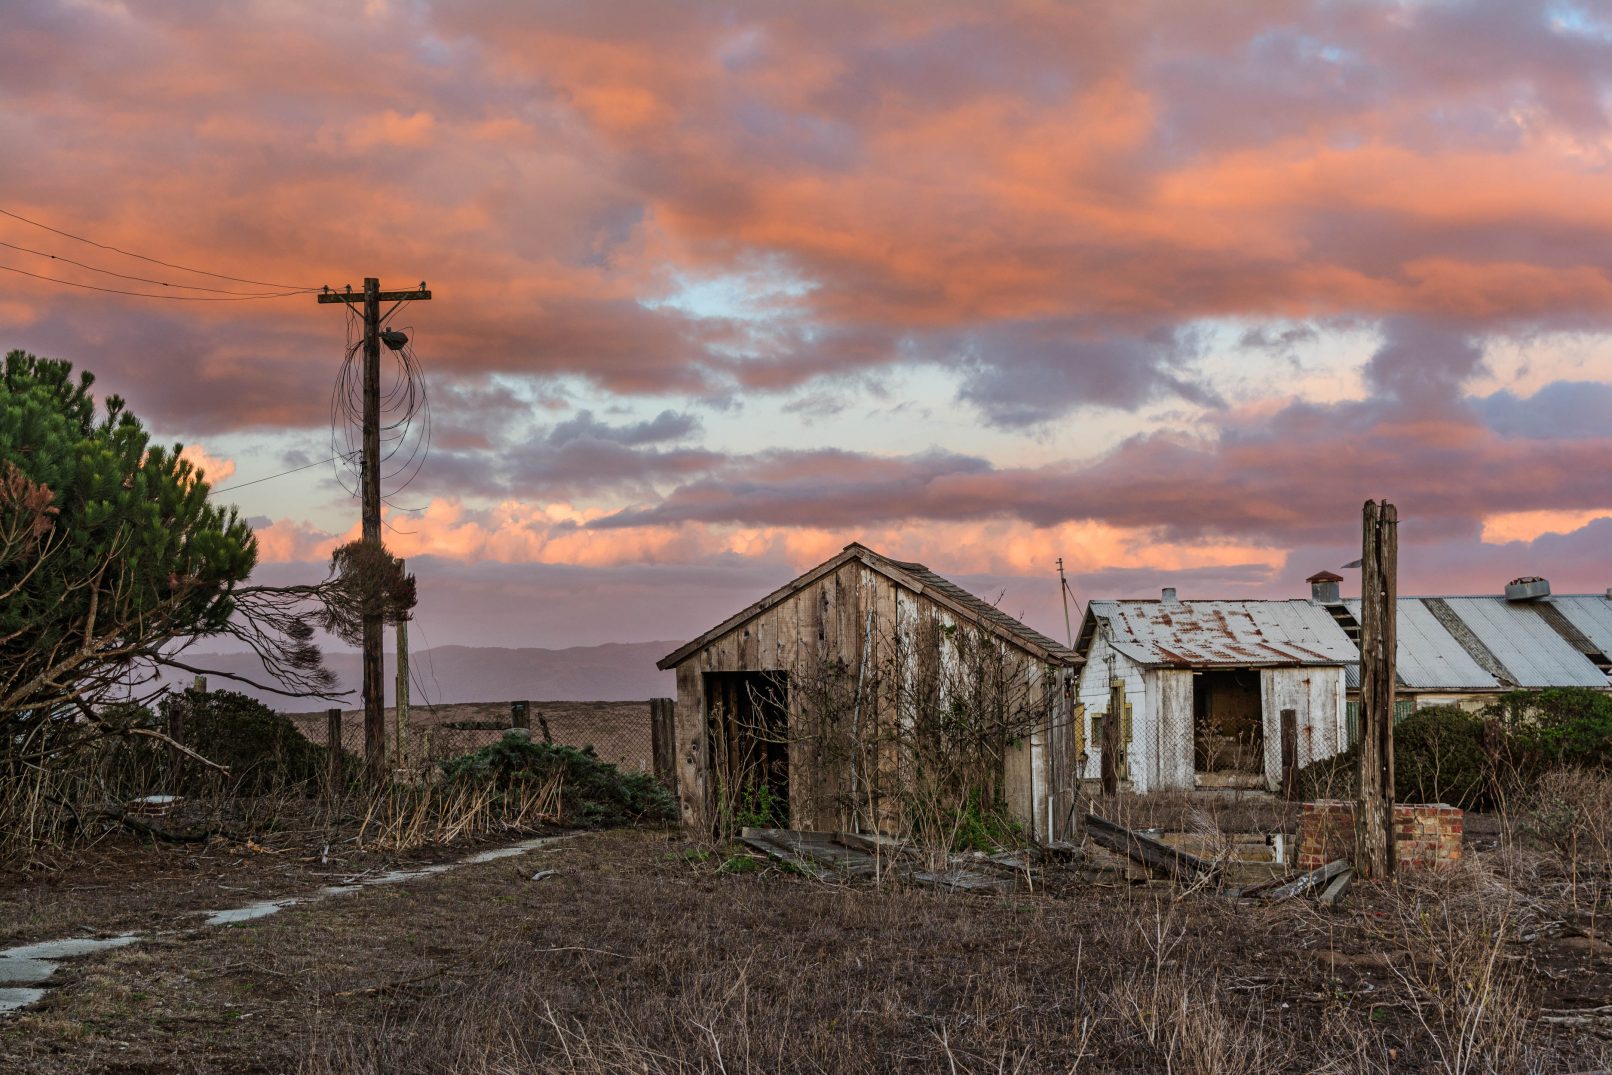 Sunset at D-Ranch, Point Reyes, California